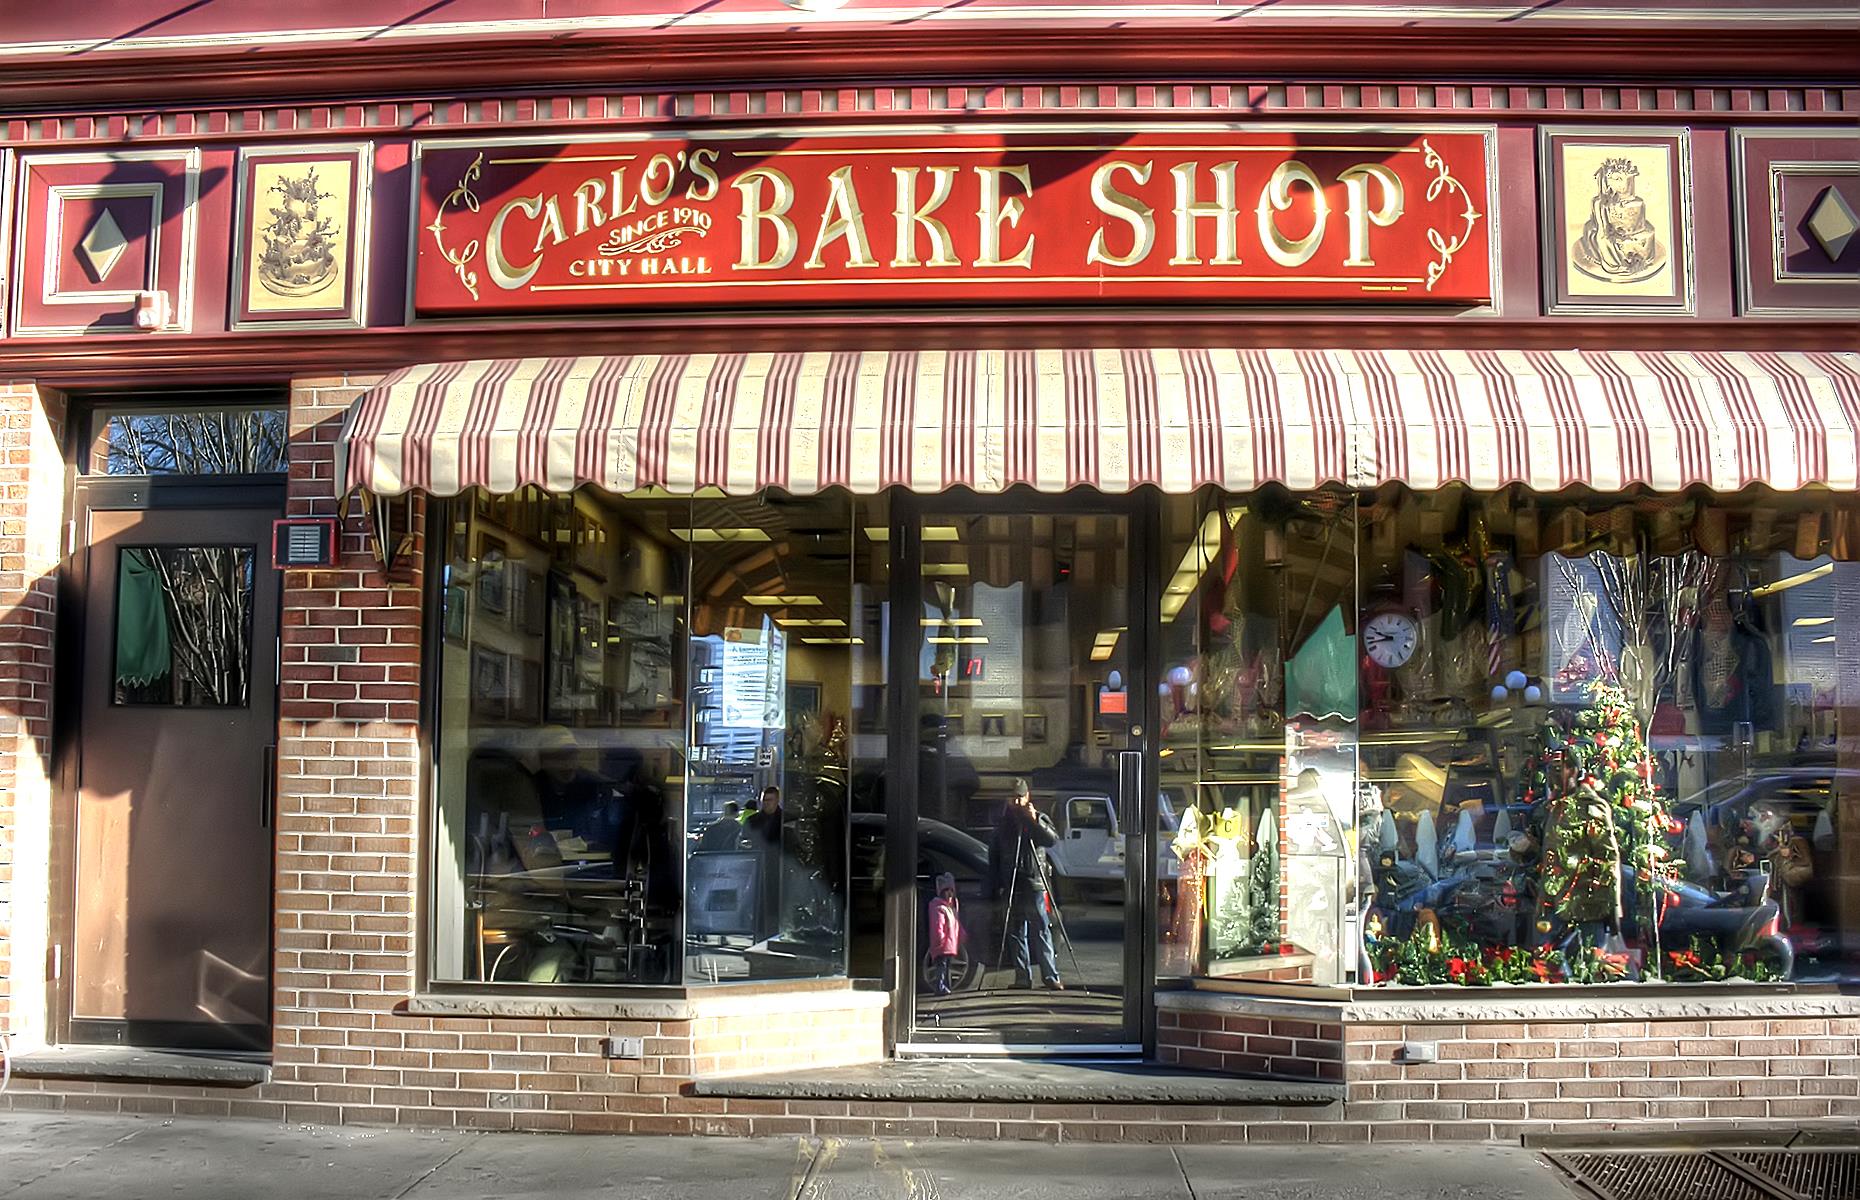 <p>The <a href="http://www.hobokenfoodtour.com/">Hoboken Food and Culture Tour</a> highlights Italian influences on New Jersey cuisine. You'll visit local institution Carlo's Bake Shop and taste handmade pastries and specialty cakes; and Antique Bar & Bakery, in operation since 1938. Beyond the bakes, try a hearty Italian sub at Fiore's deli and grab a slice of pie at Grimaldi's Pizzeria. </p>